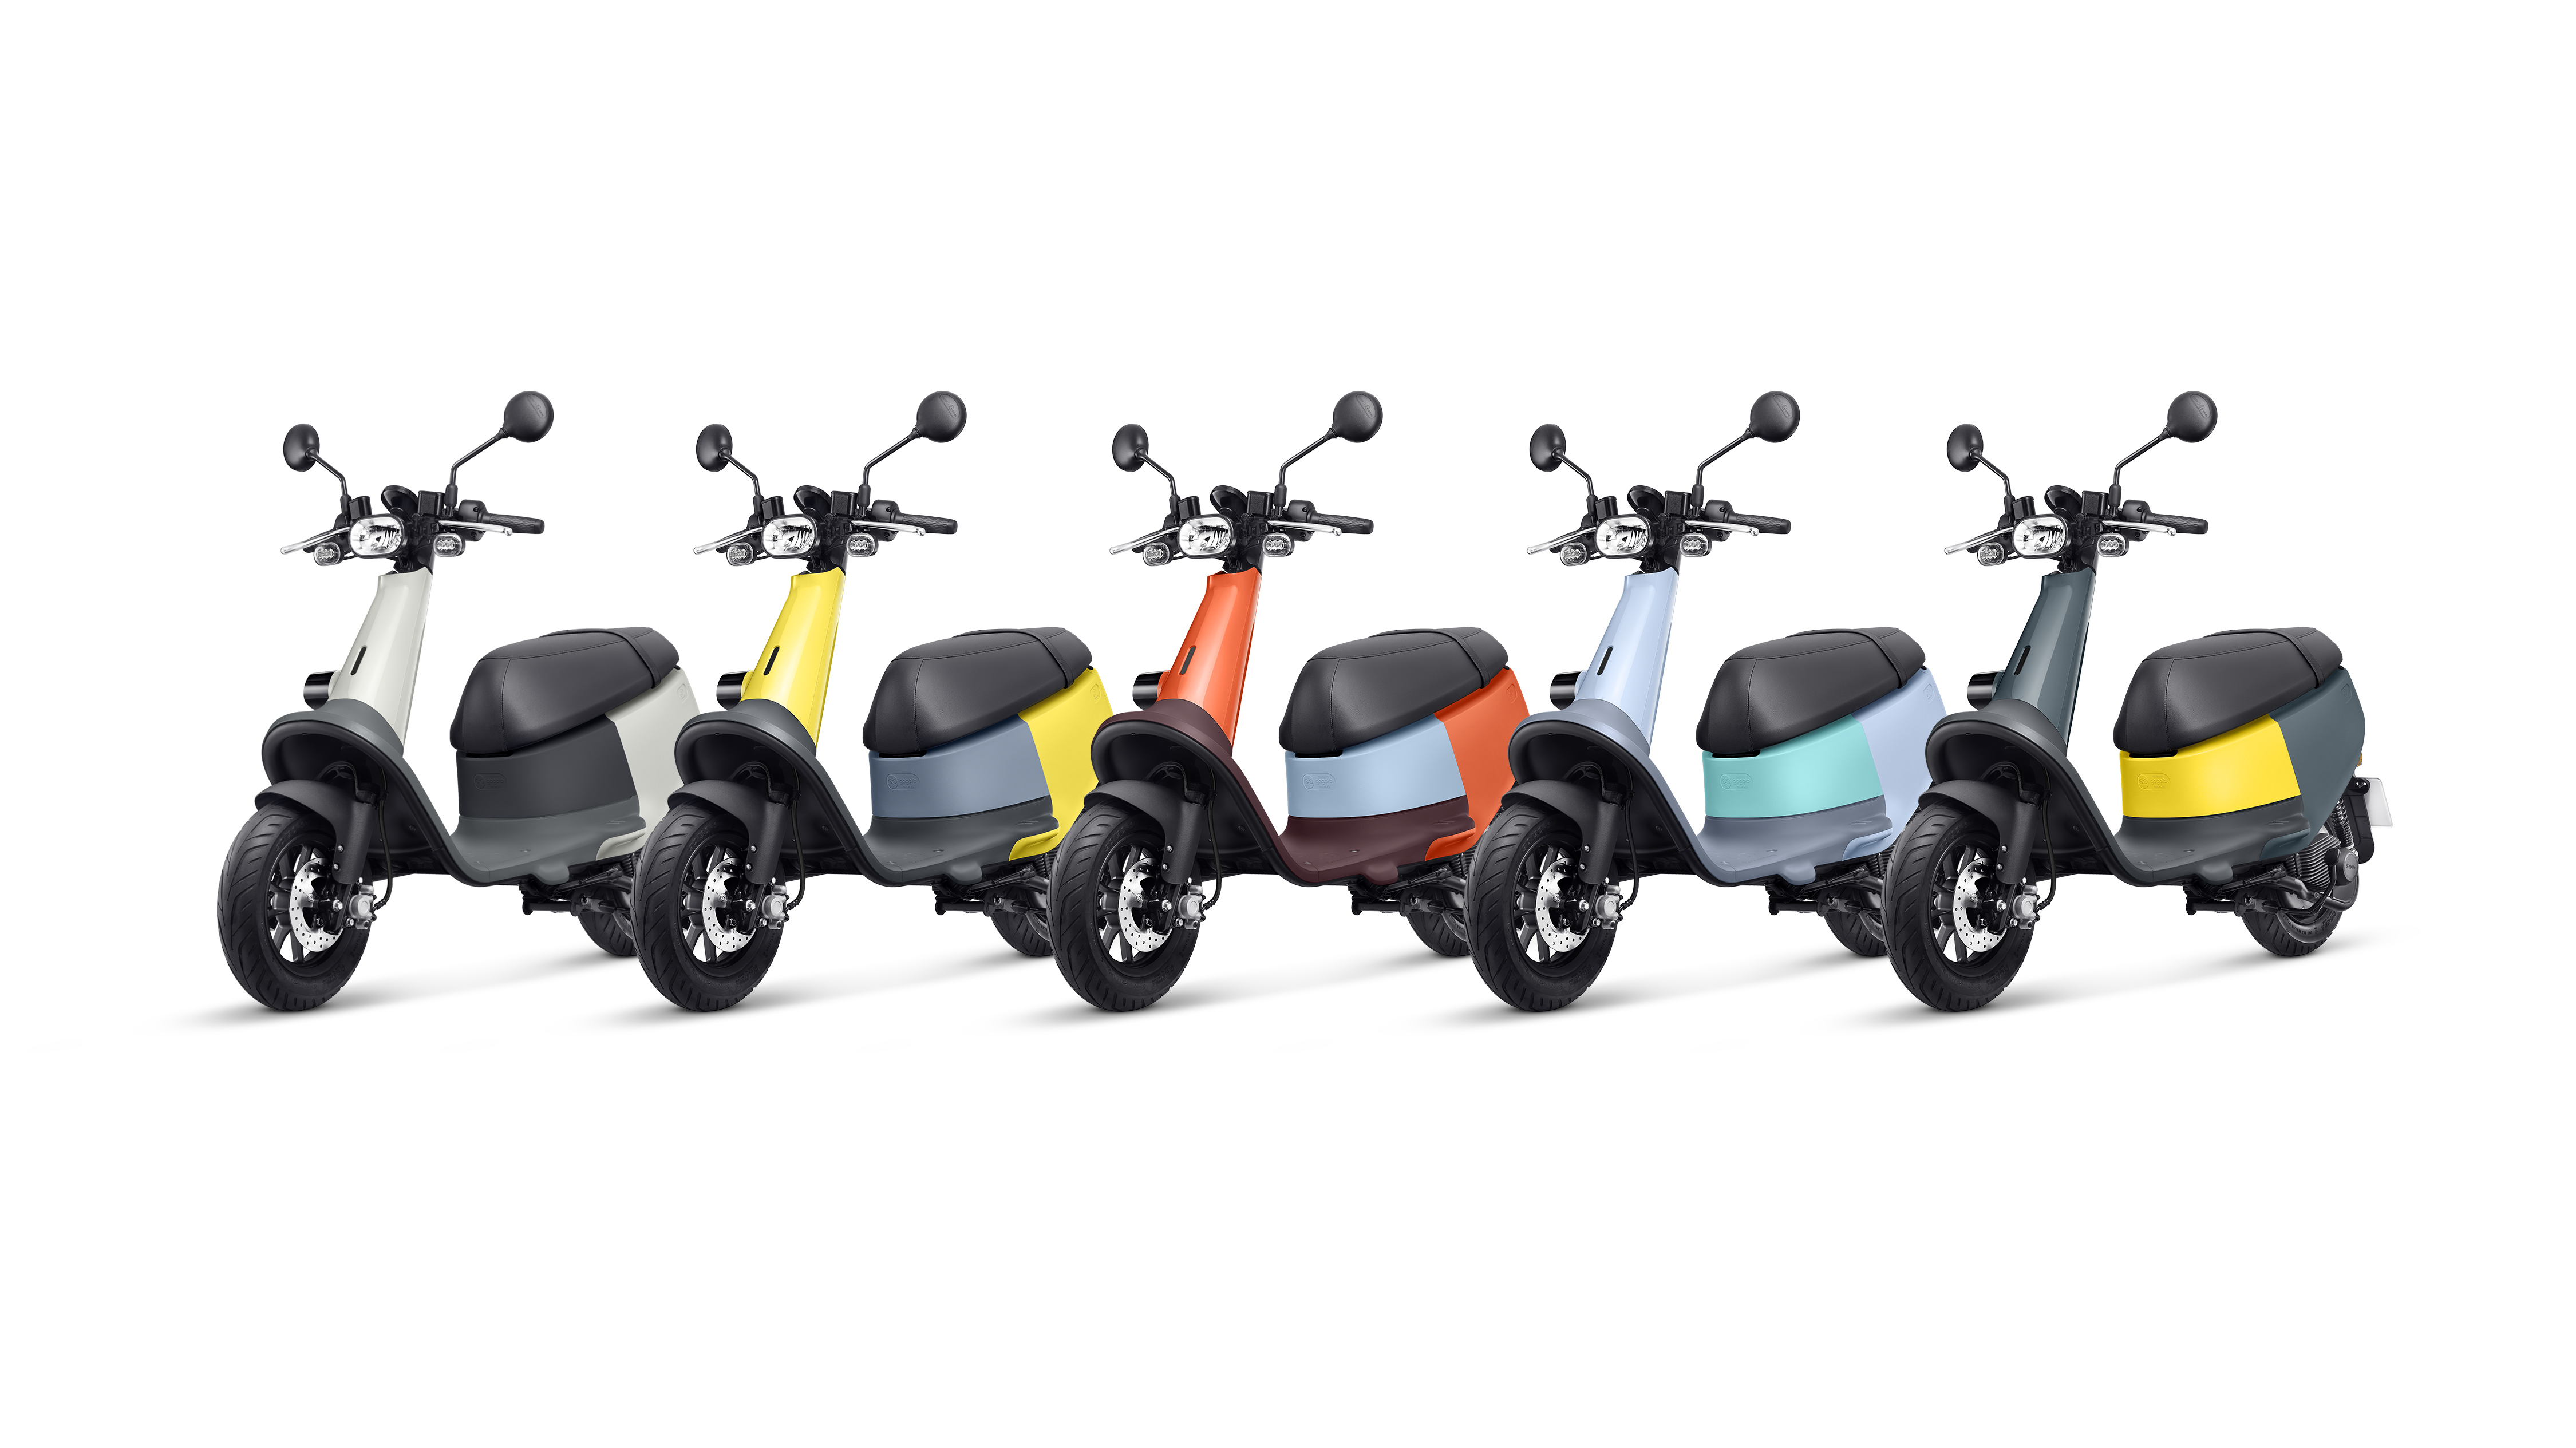 Gogoro launches its newest electric vehicle, a lightweight scooter called Viva